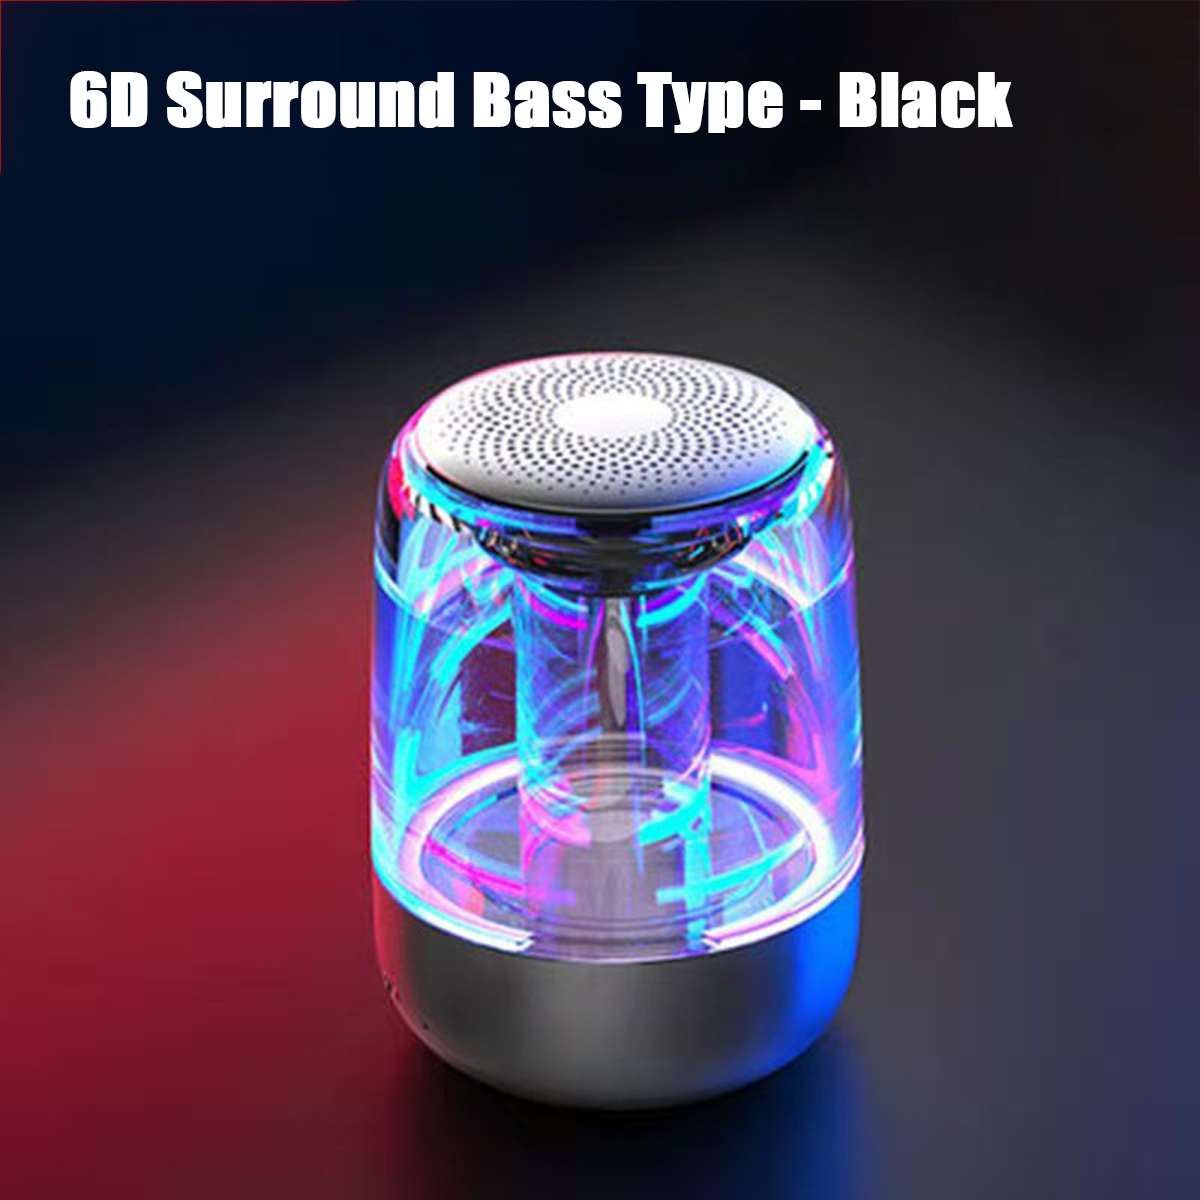 Bluetooth Wireless Speakers Waterproof Stereo Column Portable Bass Subwoofer Speaker Colorful Light Support TF Card with Mic: Black B